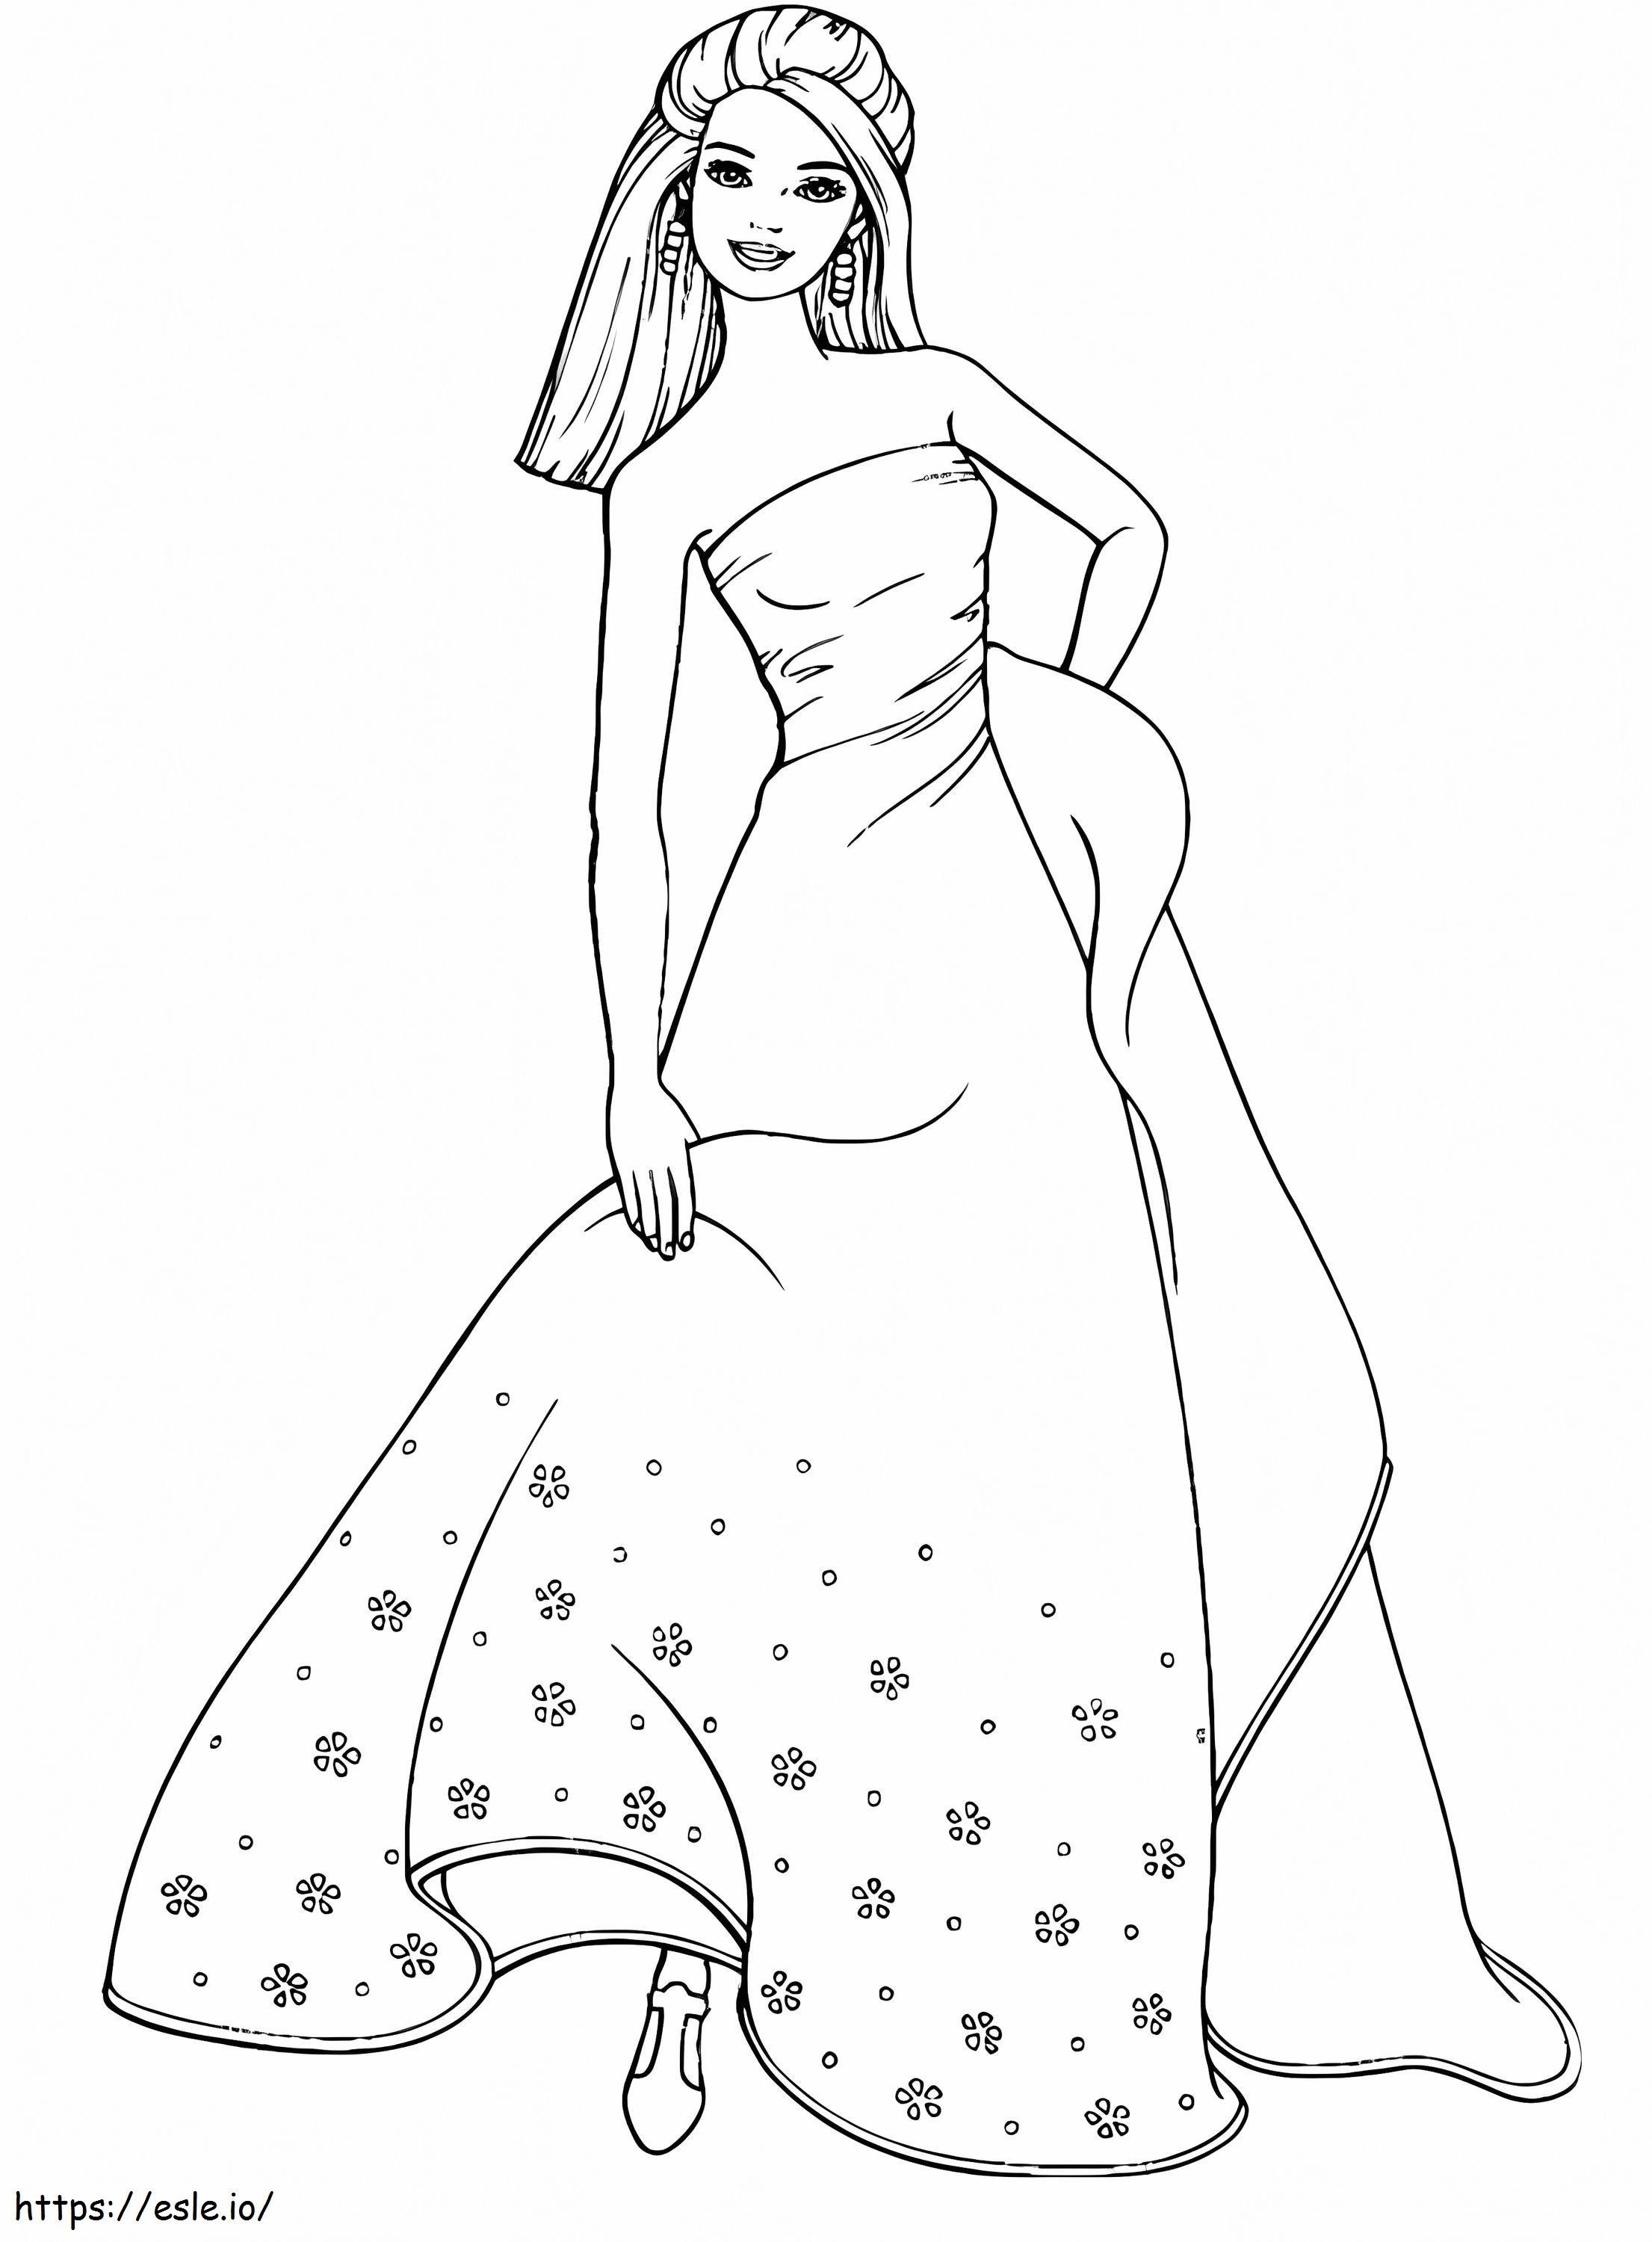 Lady In Dress coloring page